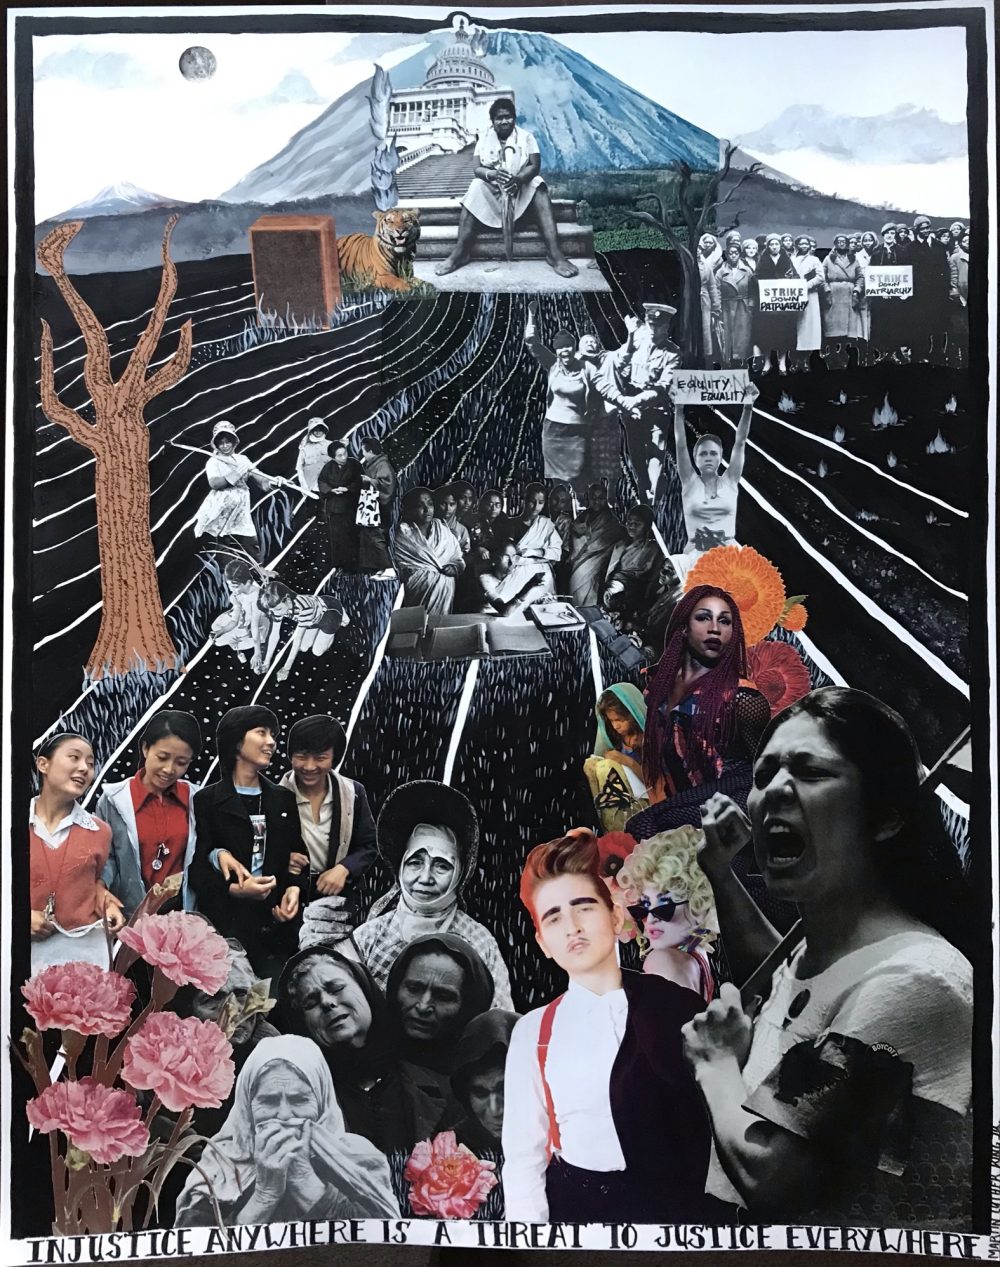 Mixed-media artwork displaying a diverse group of female-identifying individuals and their struggle to overcome injustice.